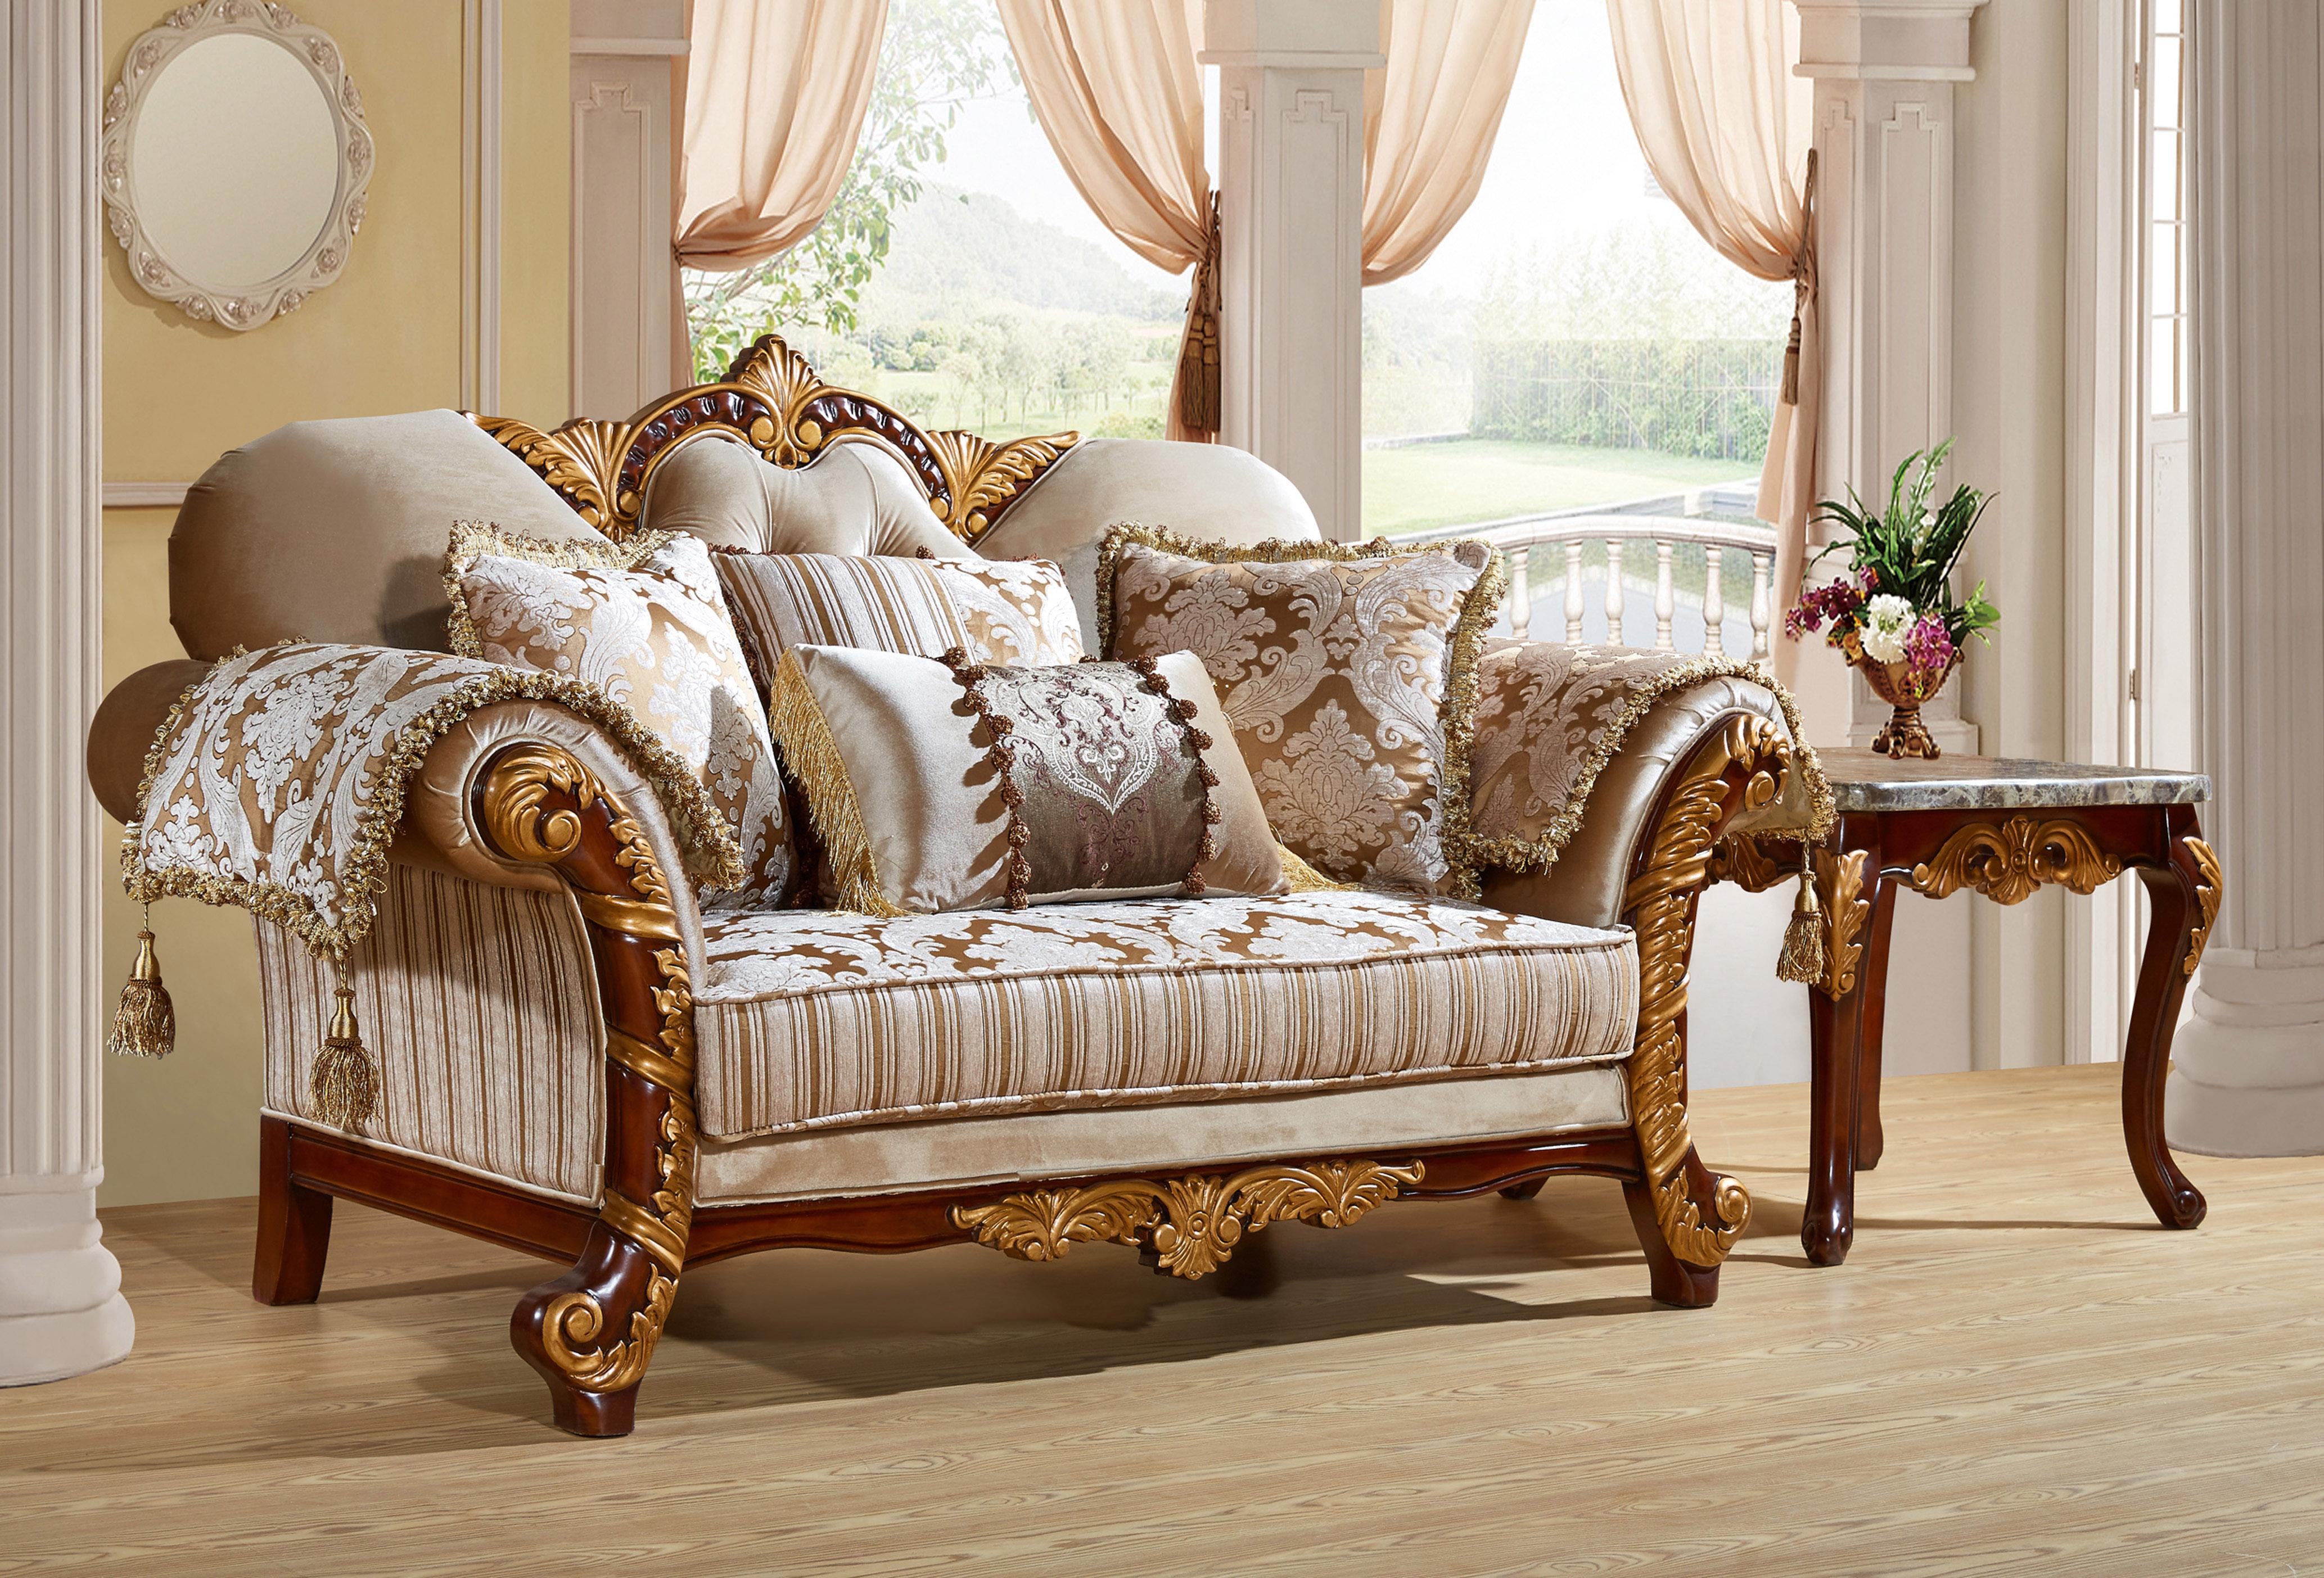 

    
Meridian 651 Camelia Cream w/Gold Living Room Set 2Pcs Carved Wood Traditional
